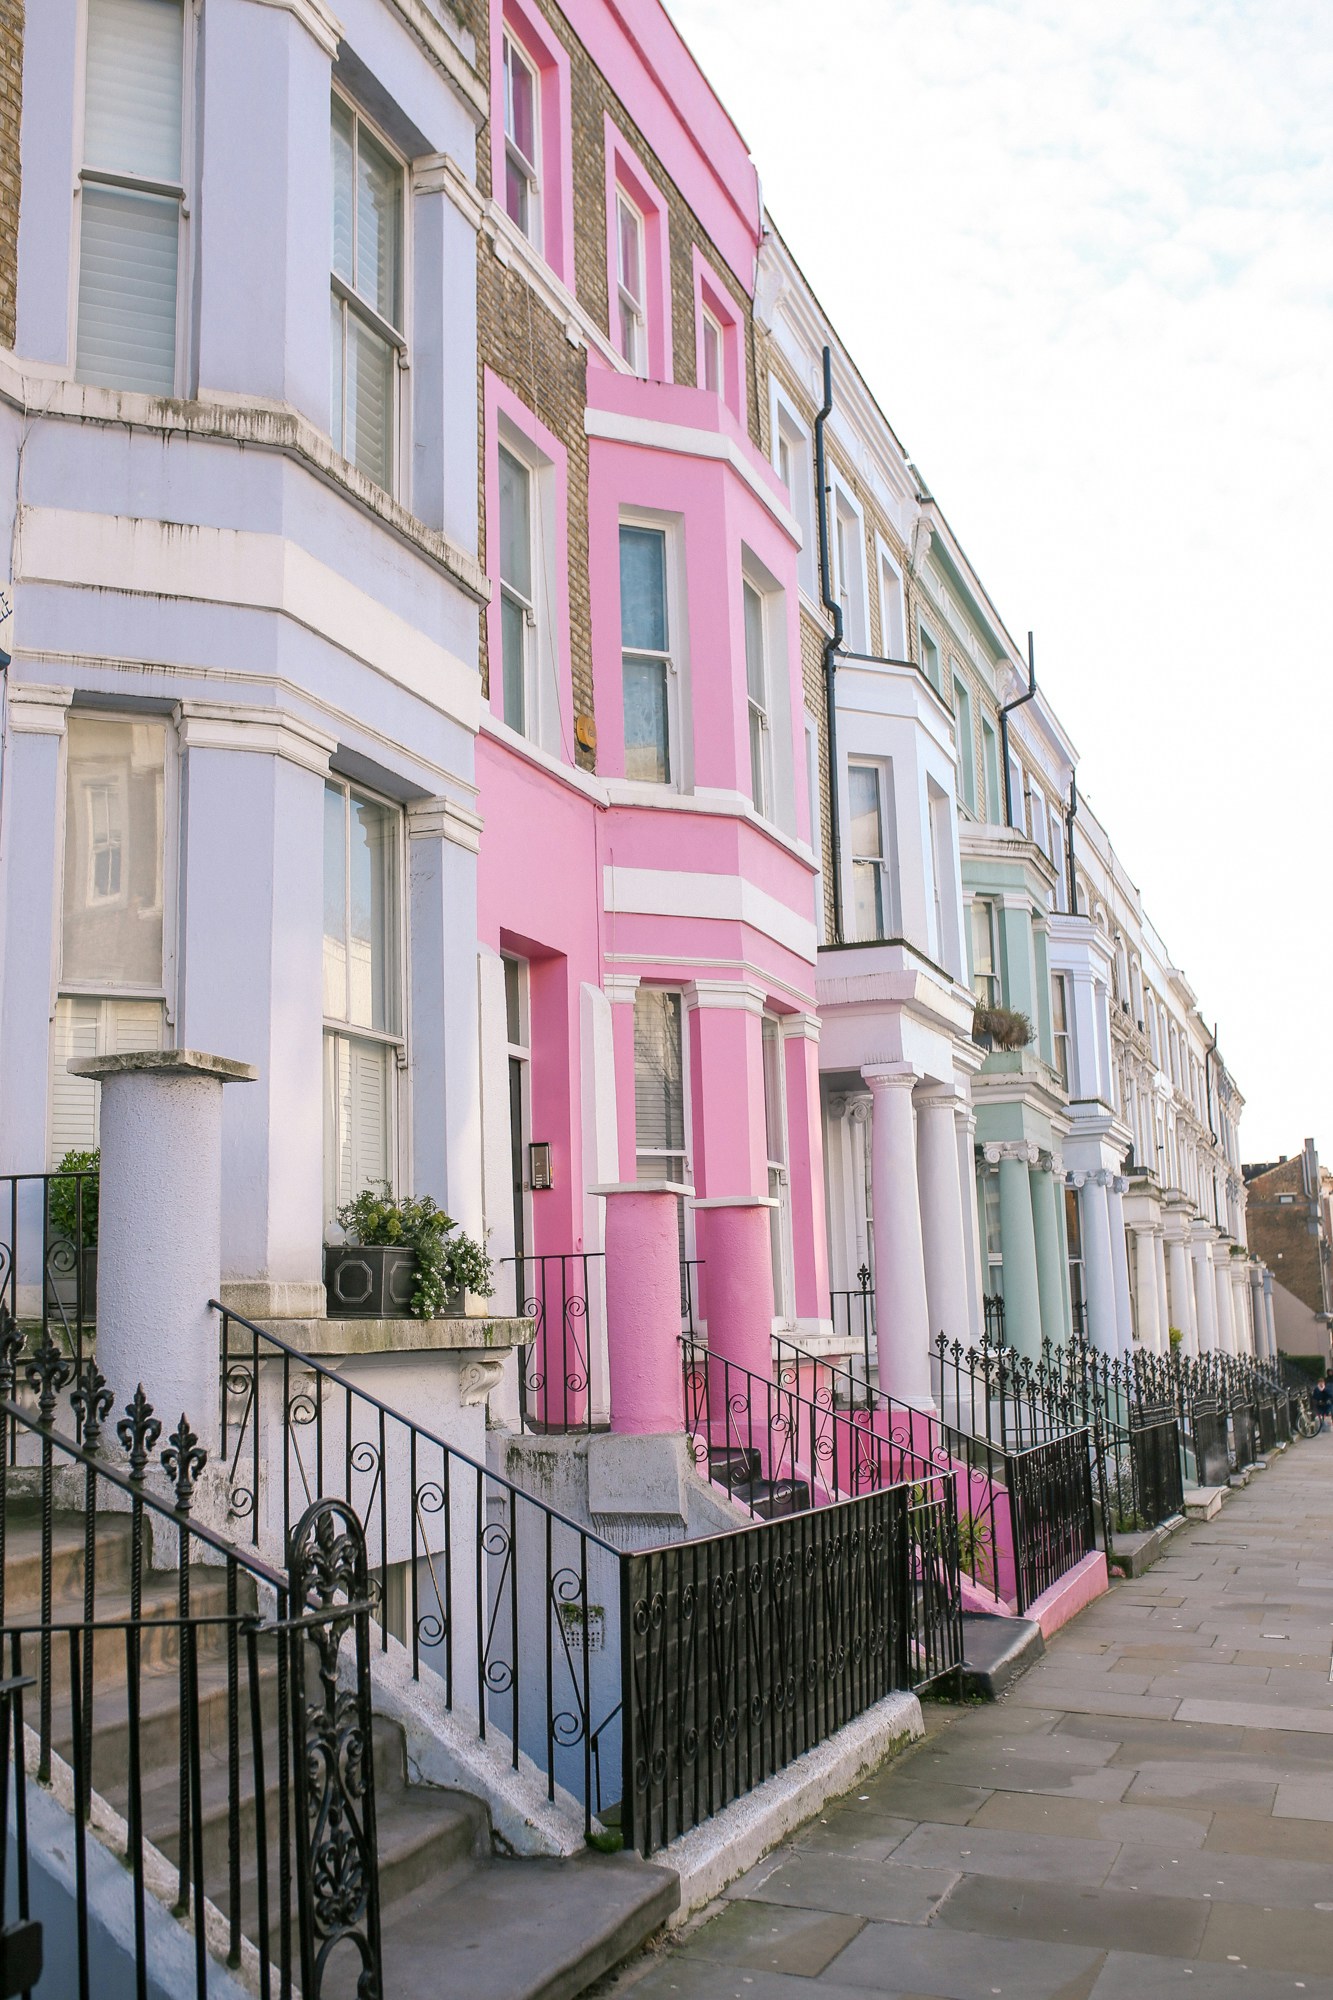 Notting Hill - the best pastel houses for Instagram photos.